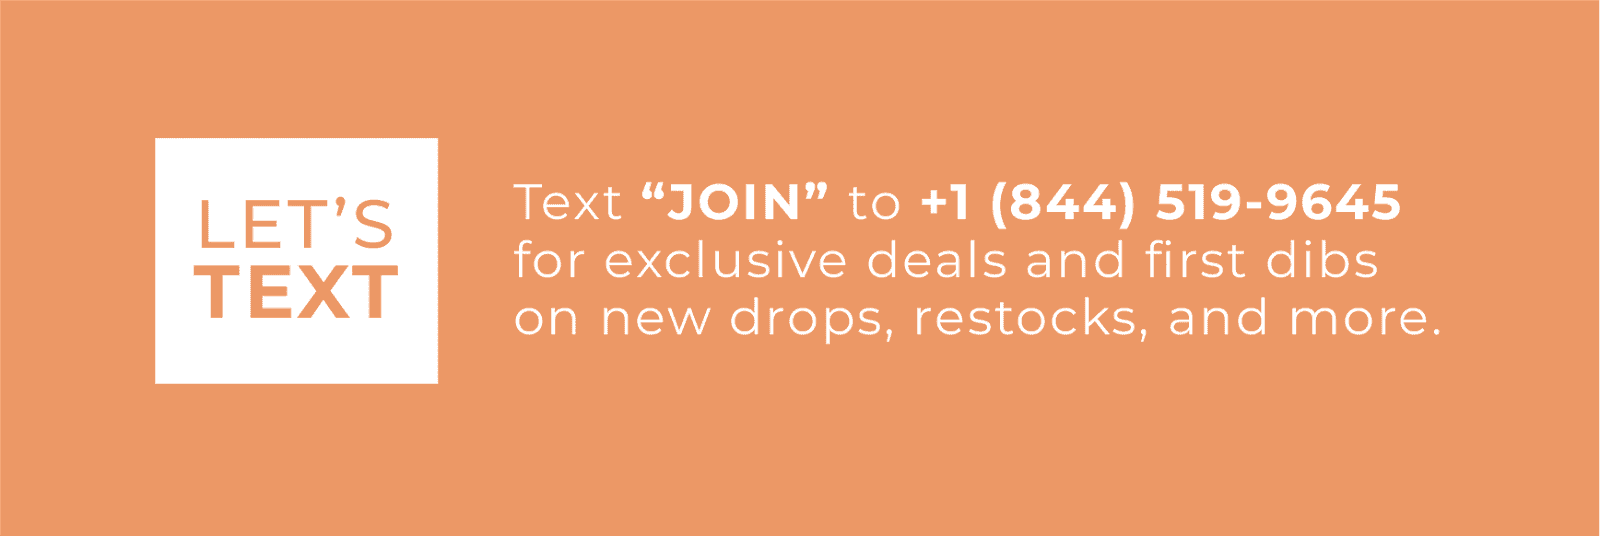 text "JOIN" to 1 844 519 9645 for exclusive deals and first dibs on new drops, restocks, and more